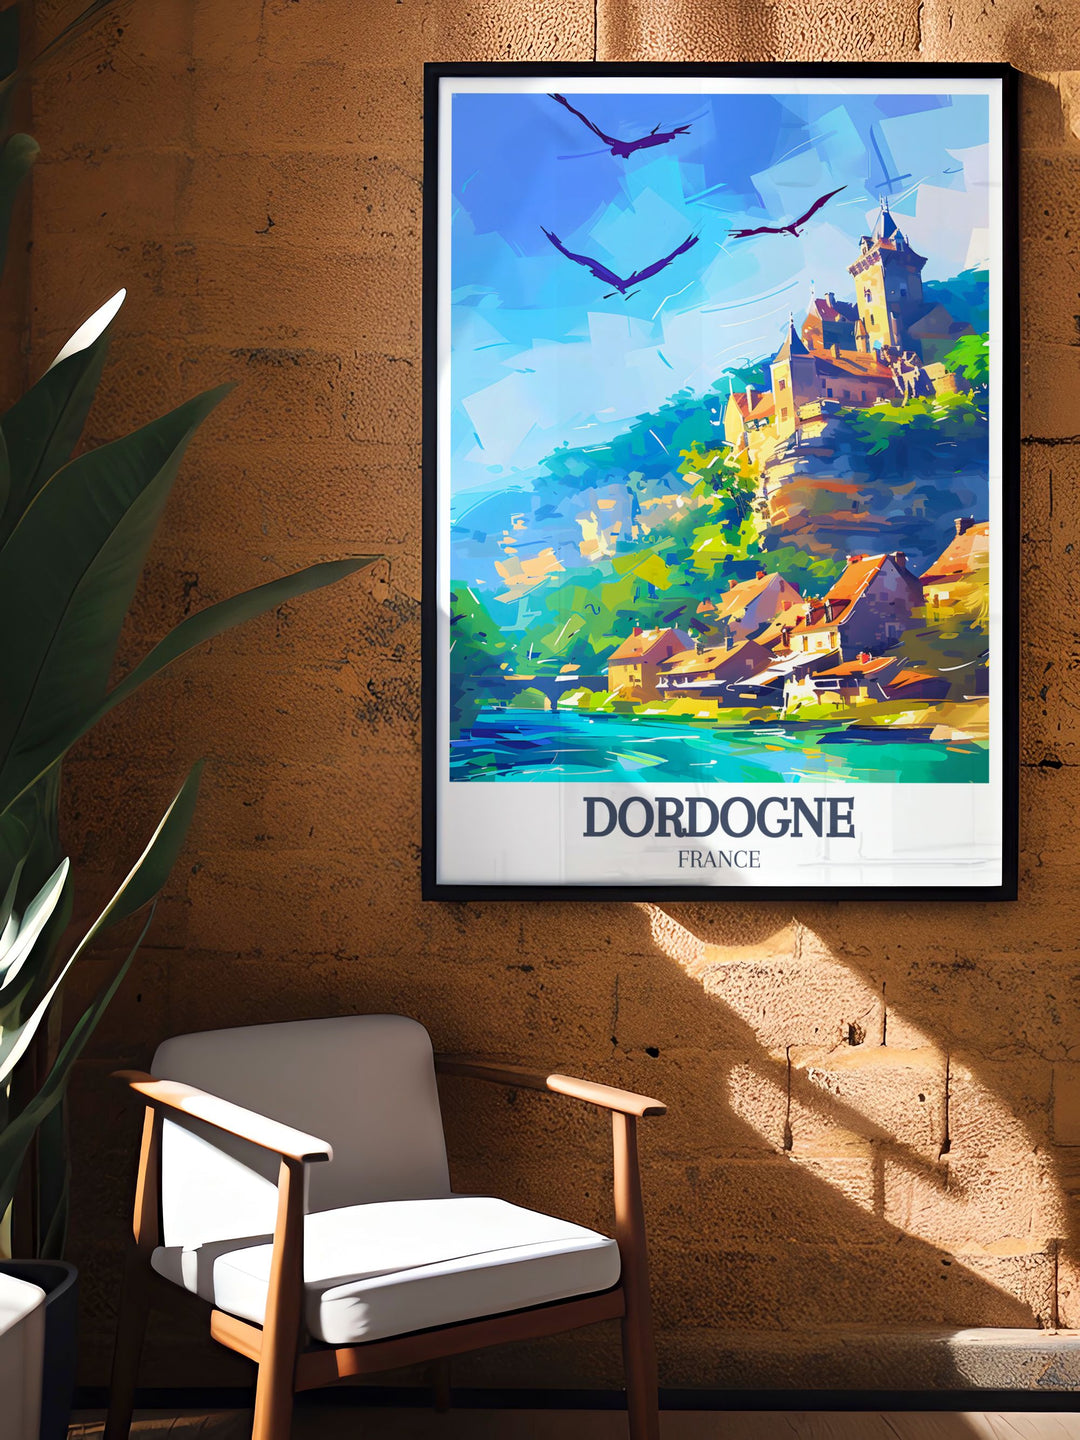 Chateau de Beynac and La Roque Gageac artwork capturing the essence of the Dordogne region a must have for art and collectibles enthusiasts and France lovers